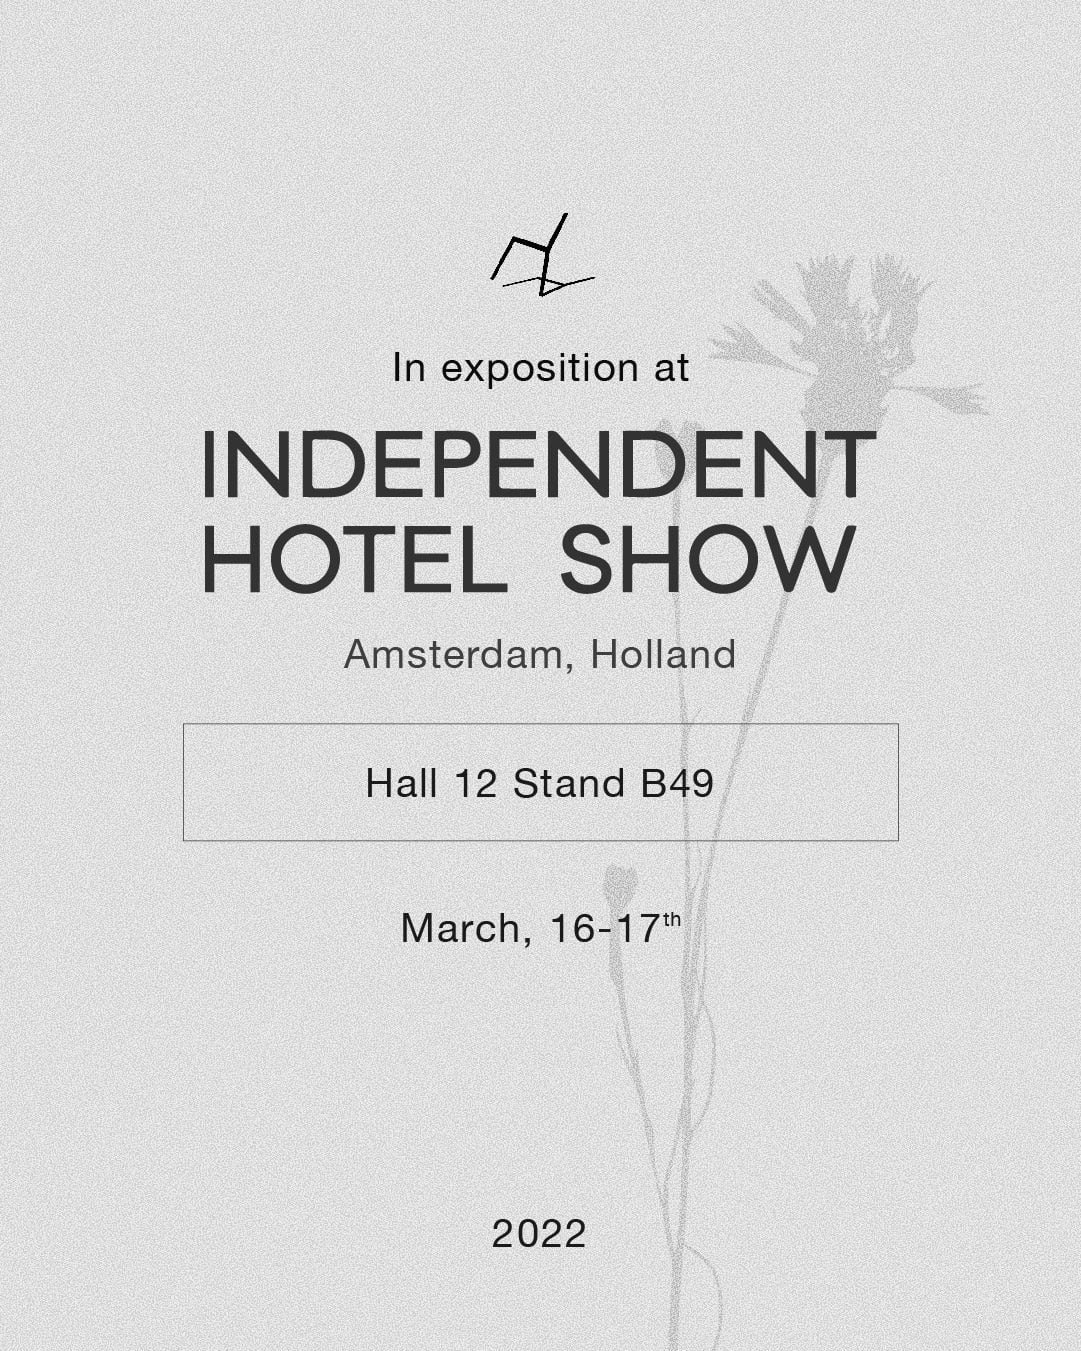 Indipendent Hotel Show, Amsterdam